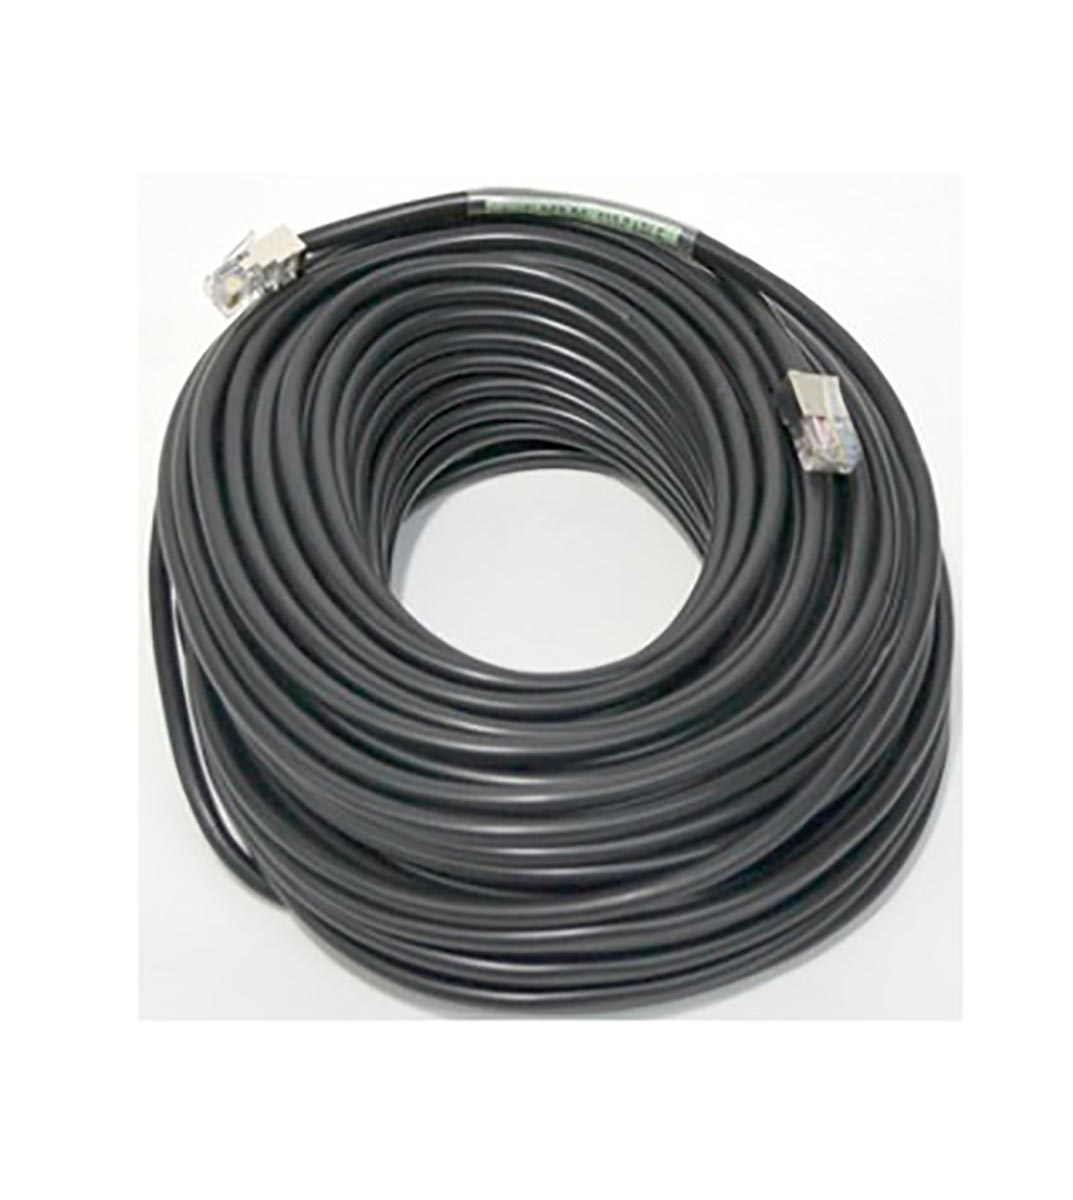 CABLE - 100' RS232 SHIELDED